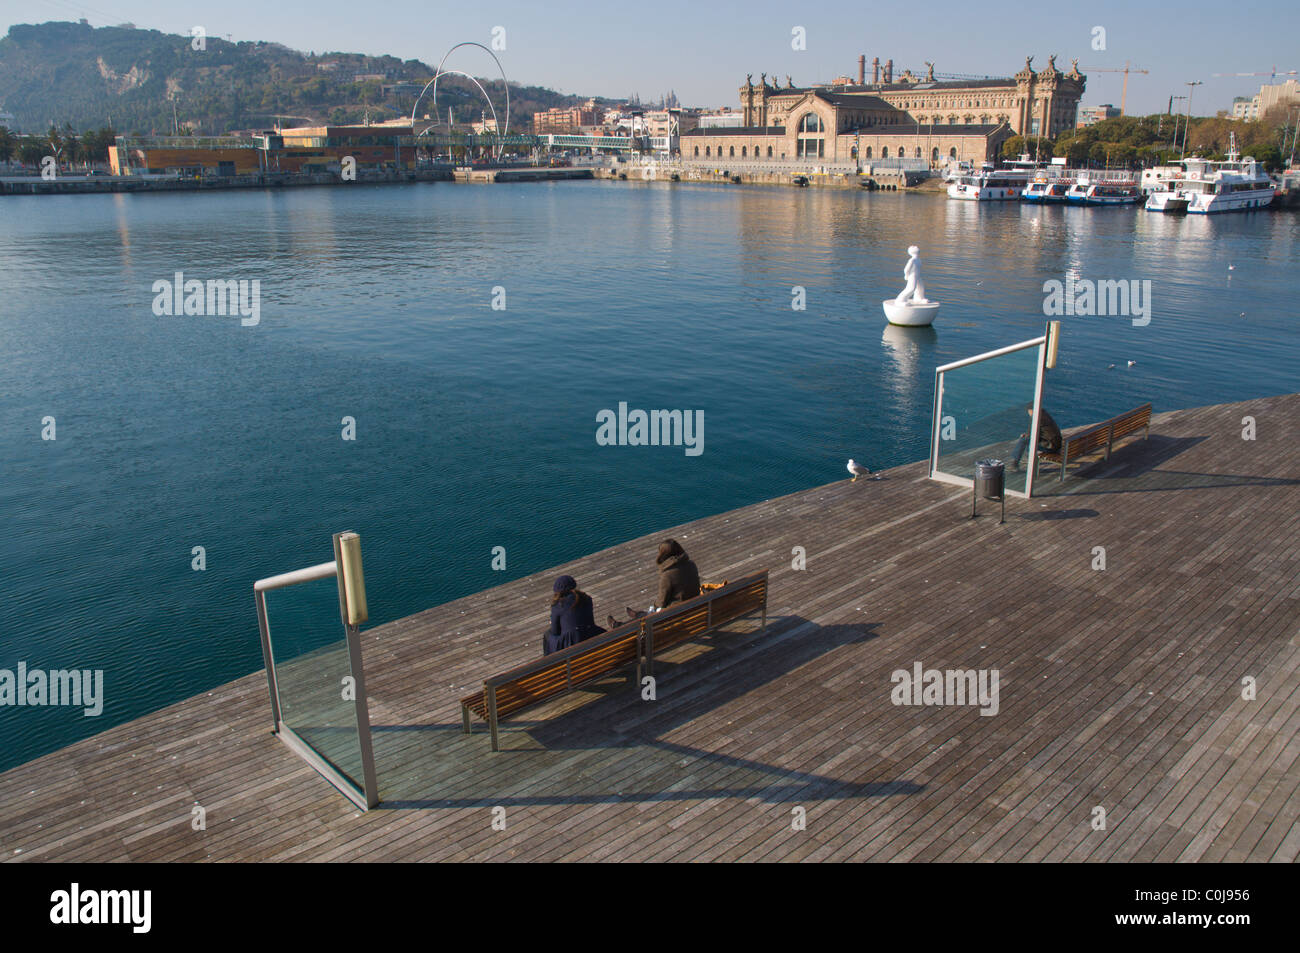 People sitting on benches at Rambla del Mar footpath at Port Vell central Barcelona Catalunya Spain Europe Stock Photo